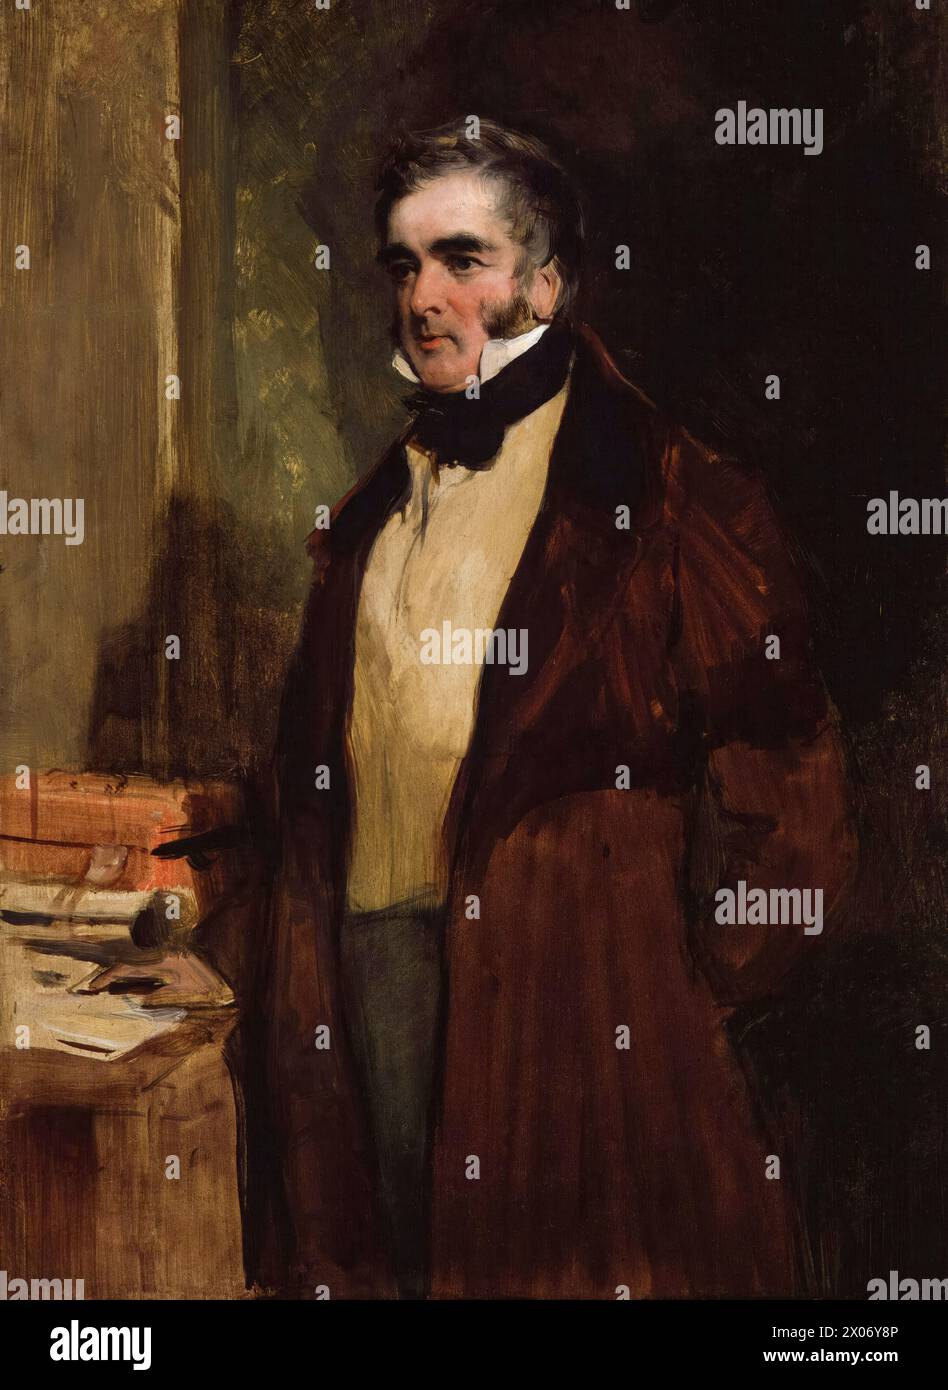 William Lamb, 2nd Viscount Melbourne (1779-1848), known as 'Lord Melbourne', Prime Minister of the United Kingdom July-November 1834 and 1835-1841, portrait painting in oil on panel by Sir Edwin Henry Landseer, 1836 Stock Photo